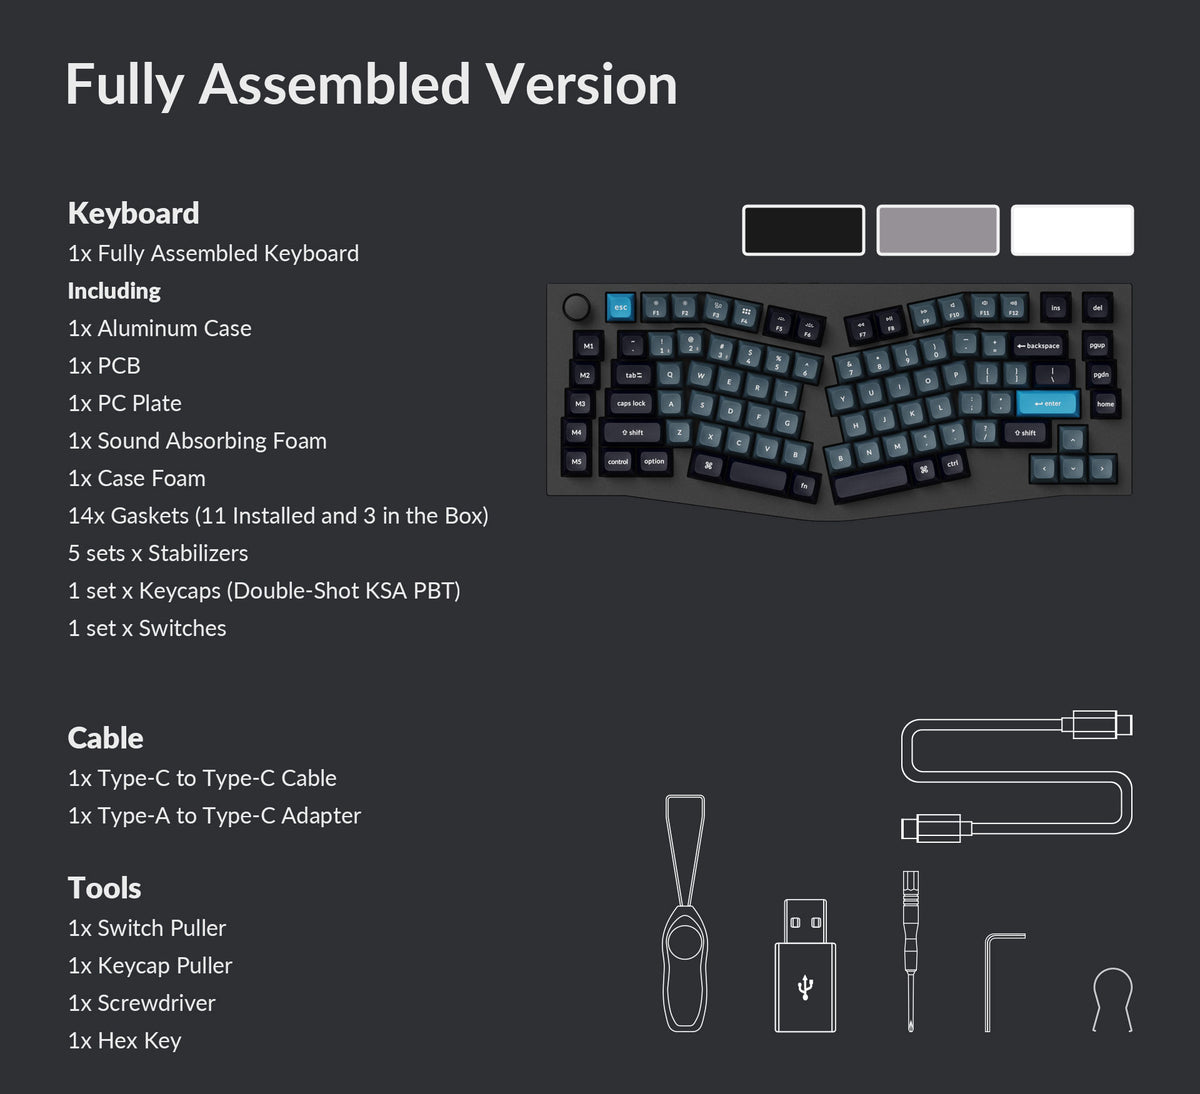 Package list of the Keychron Q10 Pro QMK/VIA 75% Alice layout wireless custom mechanical keyboard fully assembled version